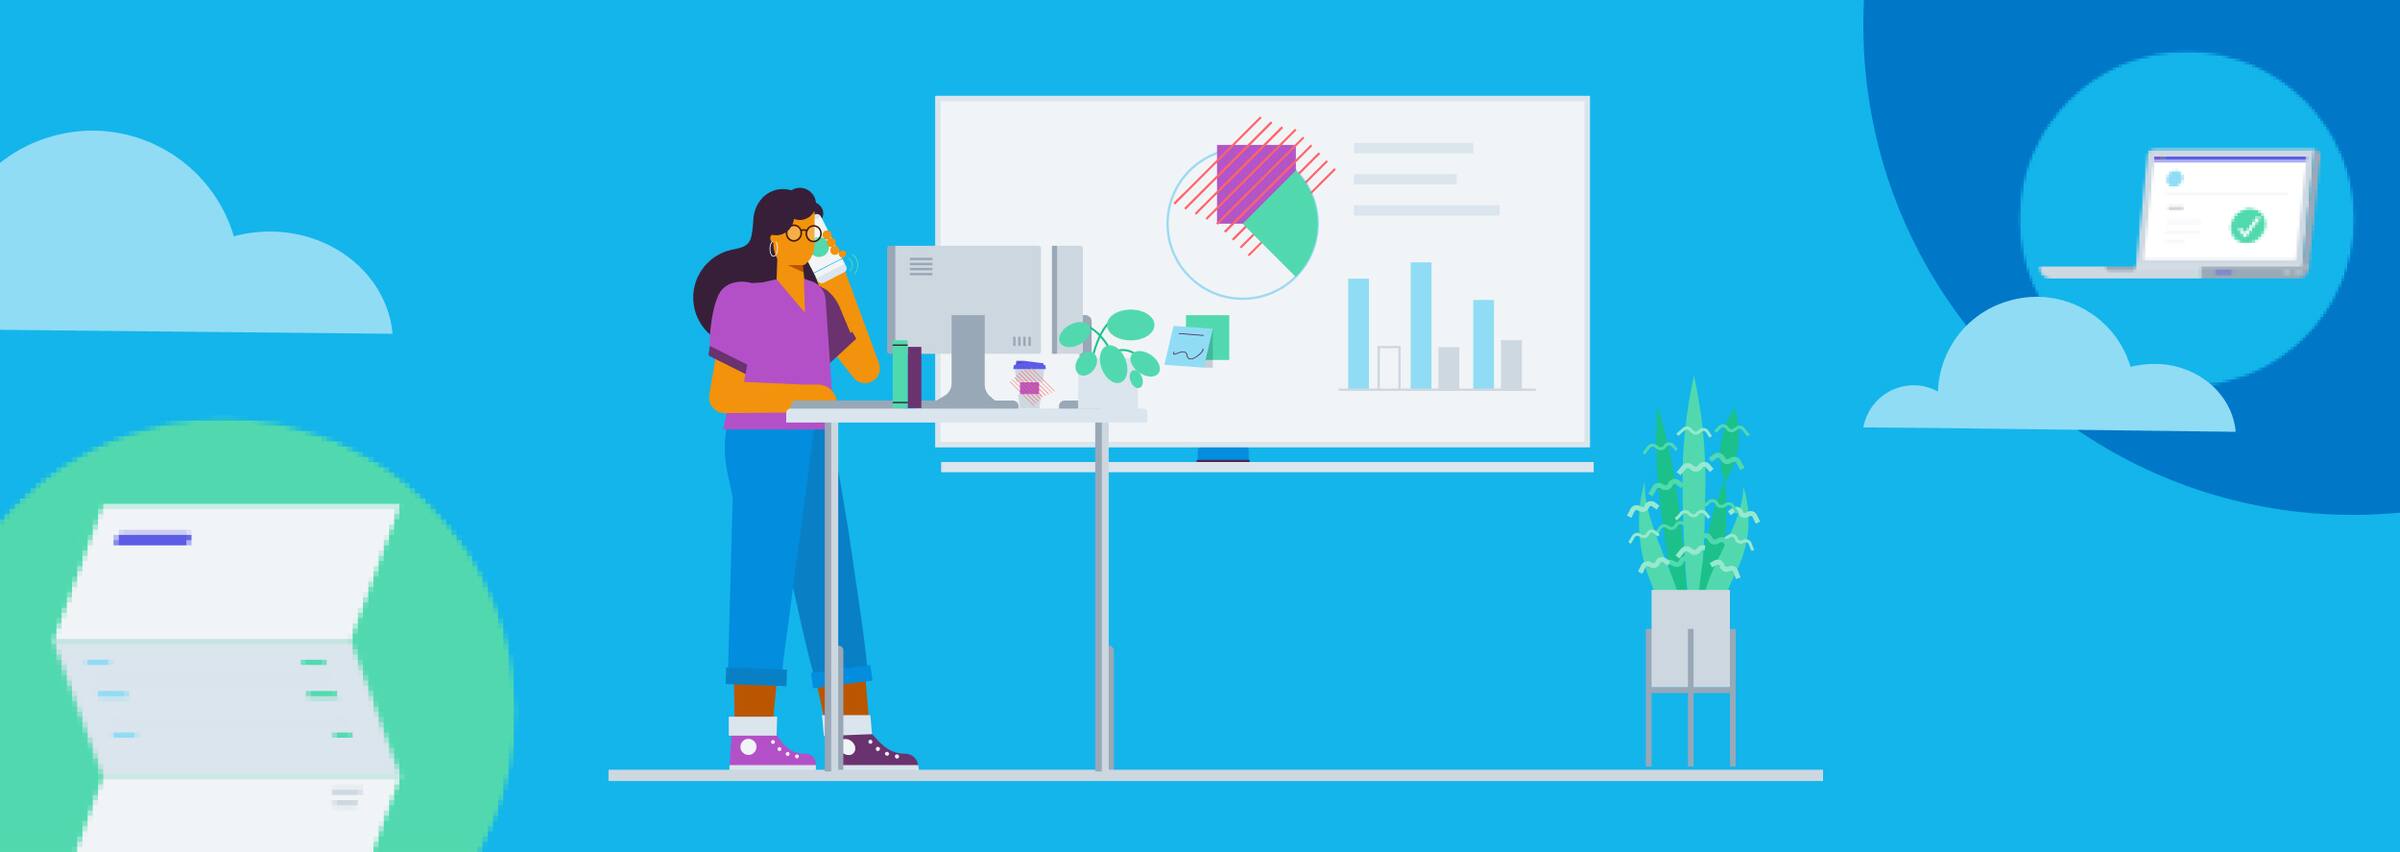 Illustration of lady working on computer infront of a board of charts